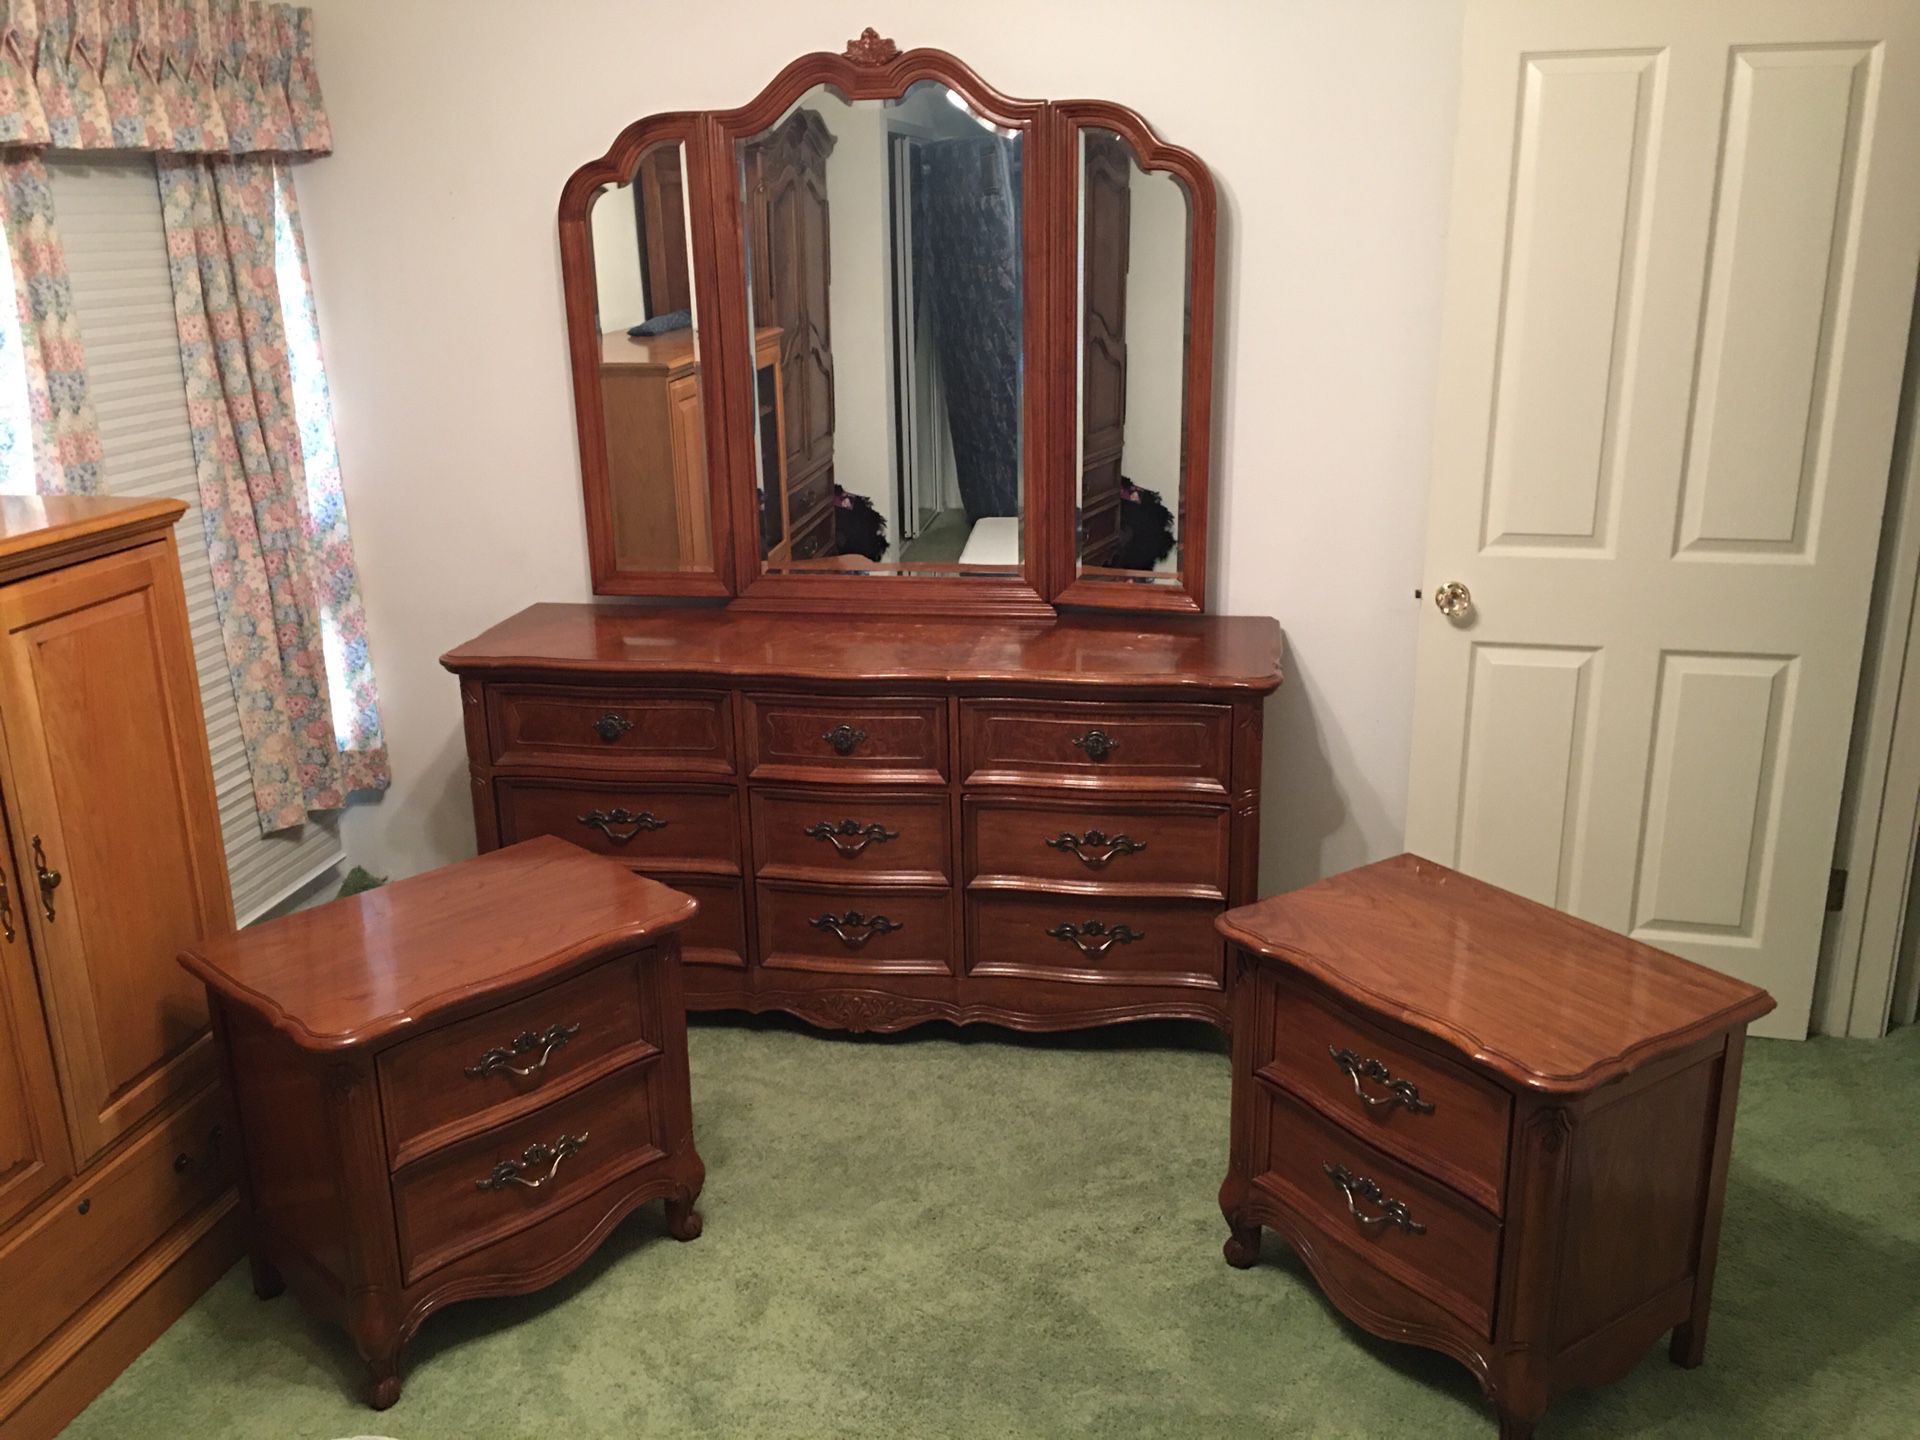 SOLID WOOD, HIGH QUALITY BEDROOM SET - DRESSER w/MIRROR, TWO BEDSIDE TABLES, BED FRAME AND BACKBOARD